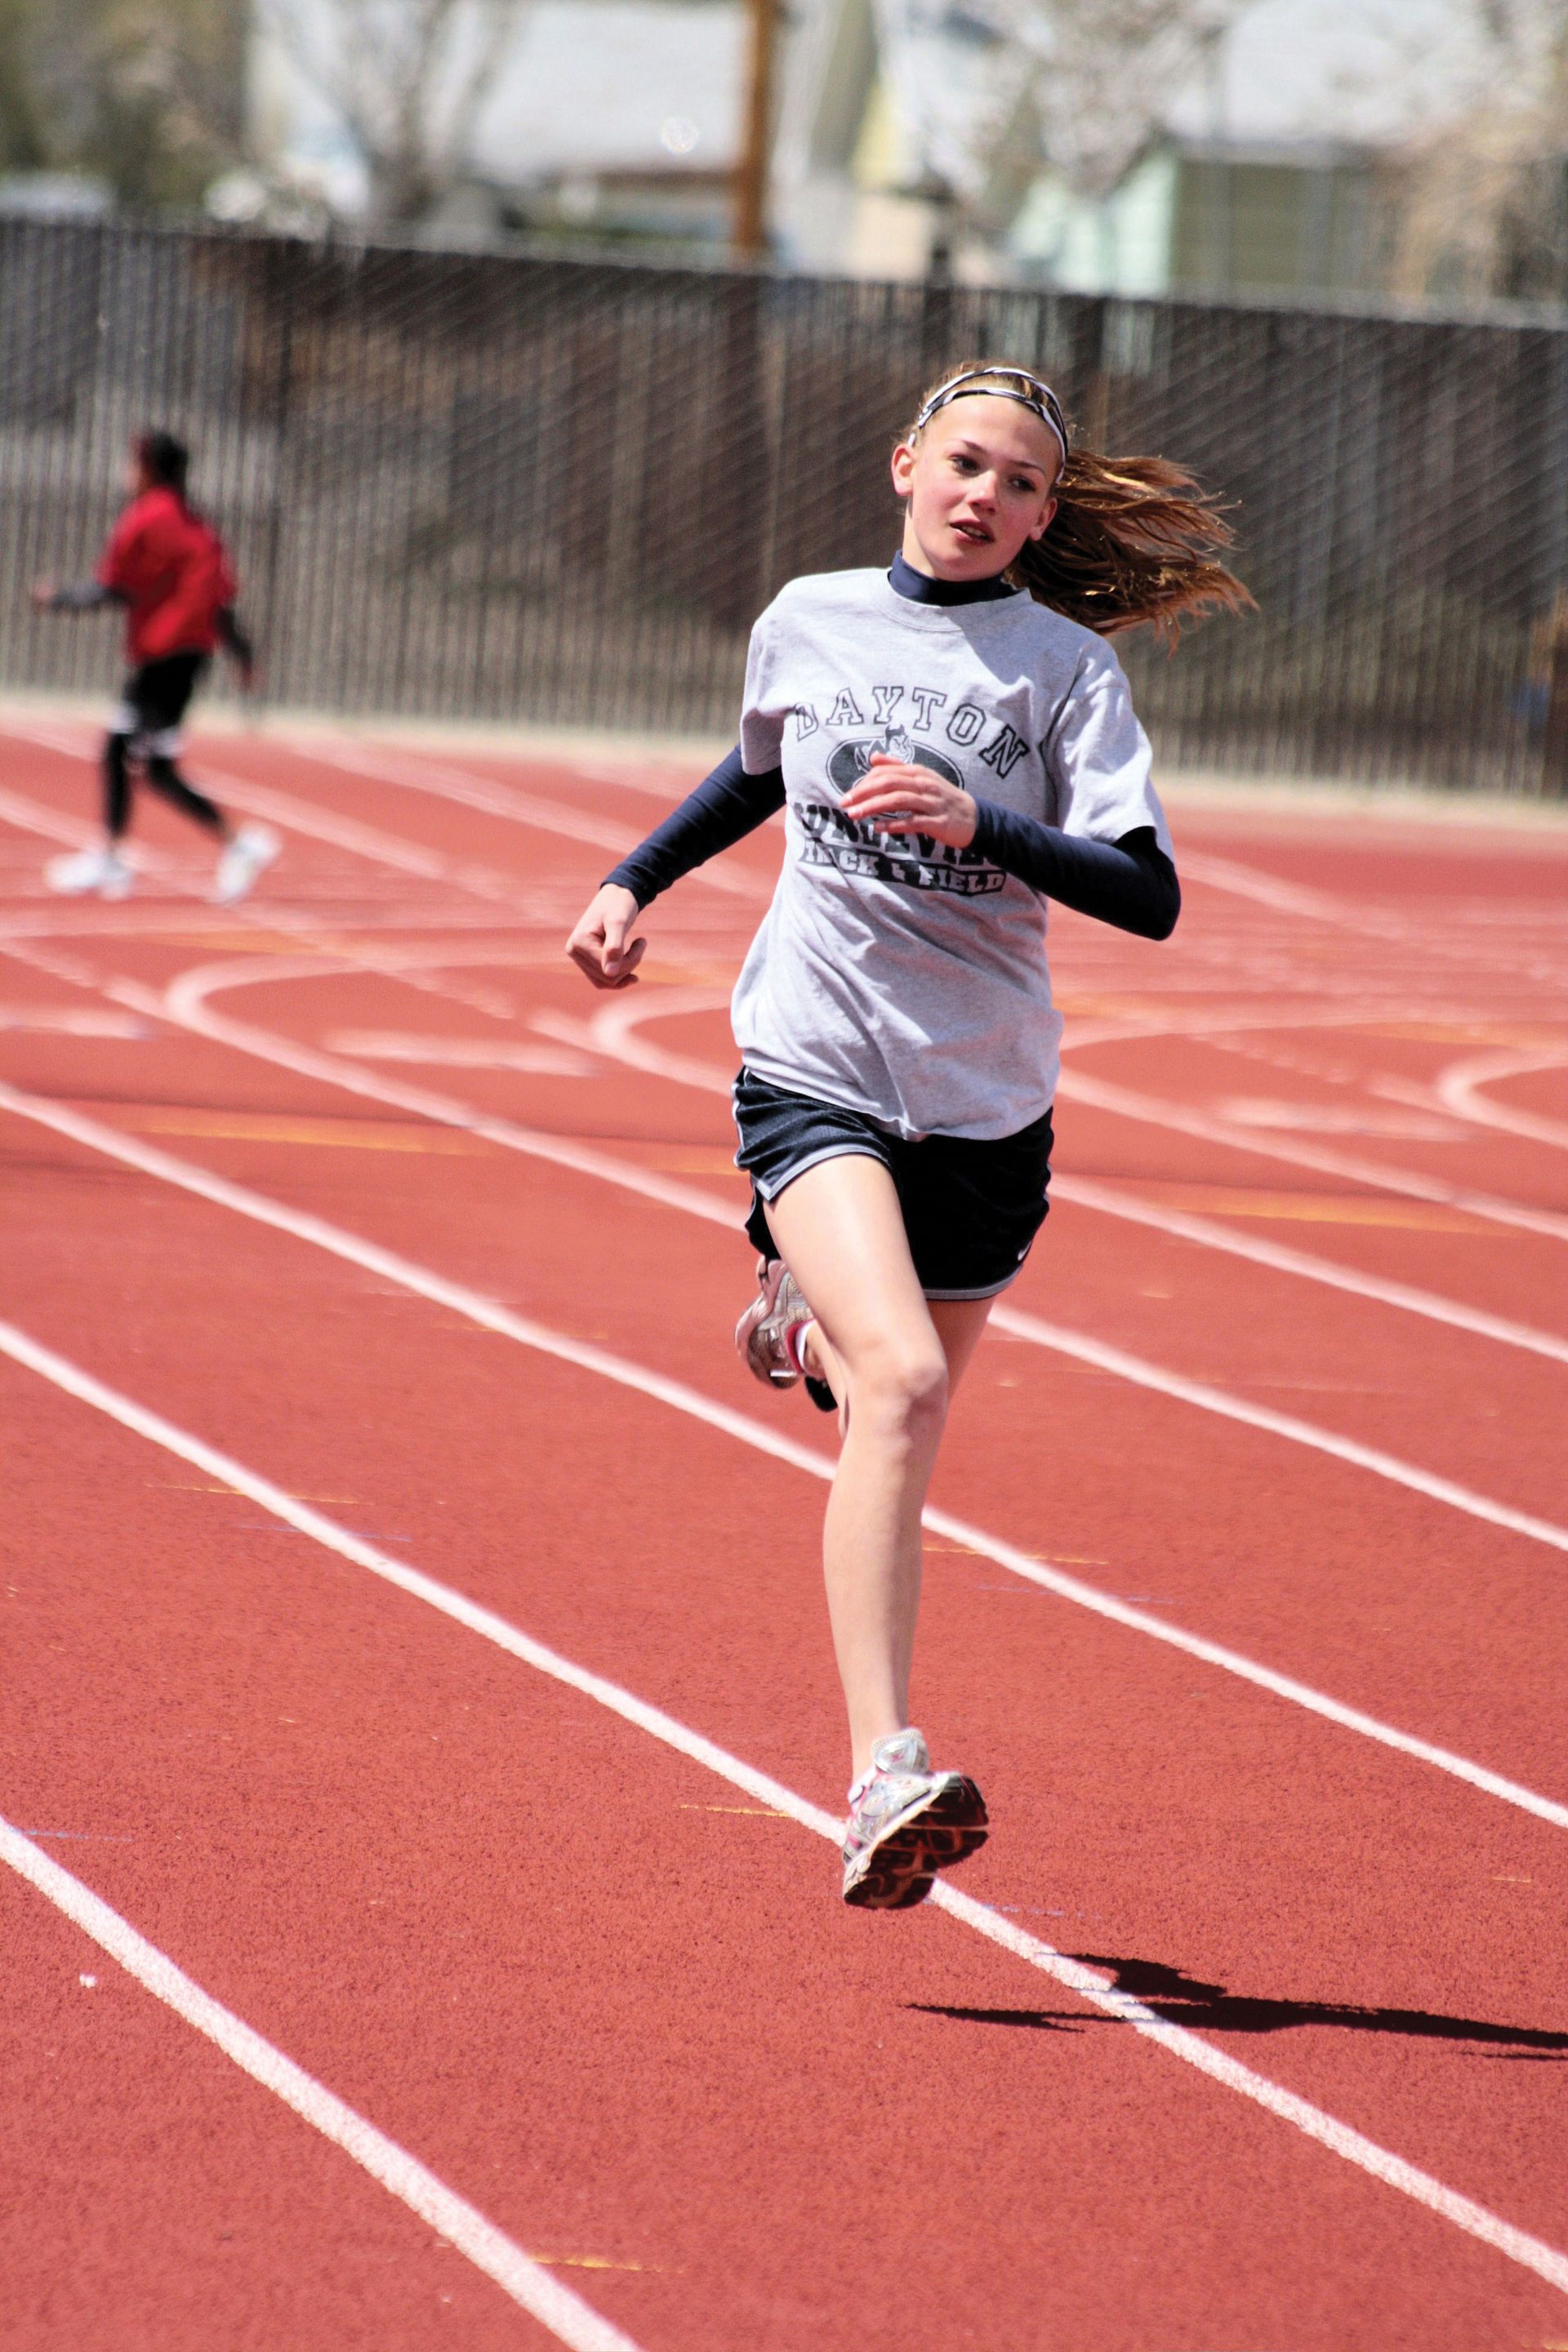 A photograph of a runner competing in a race.